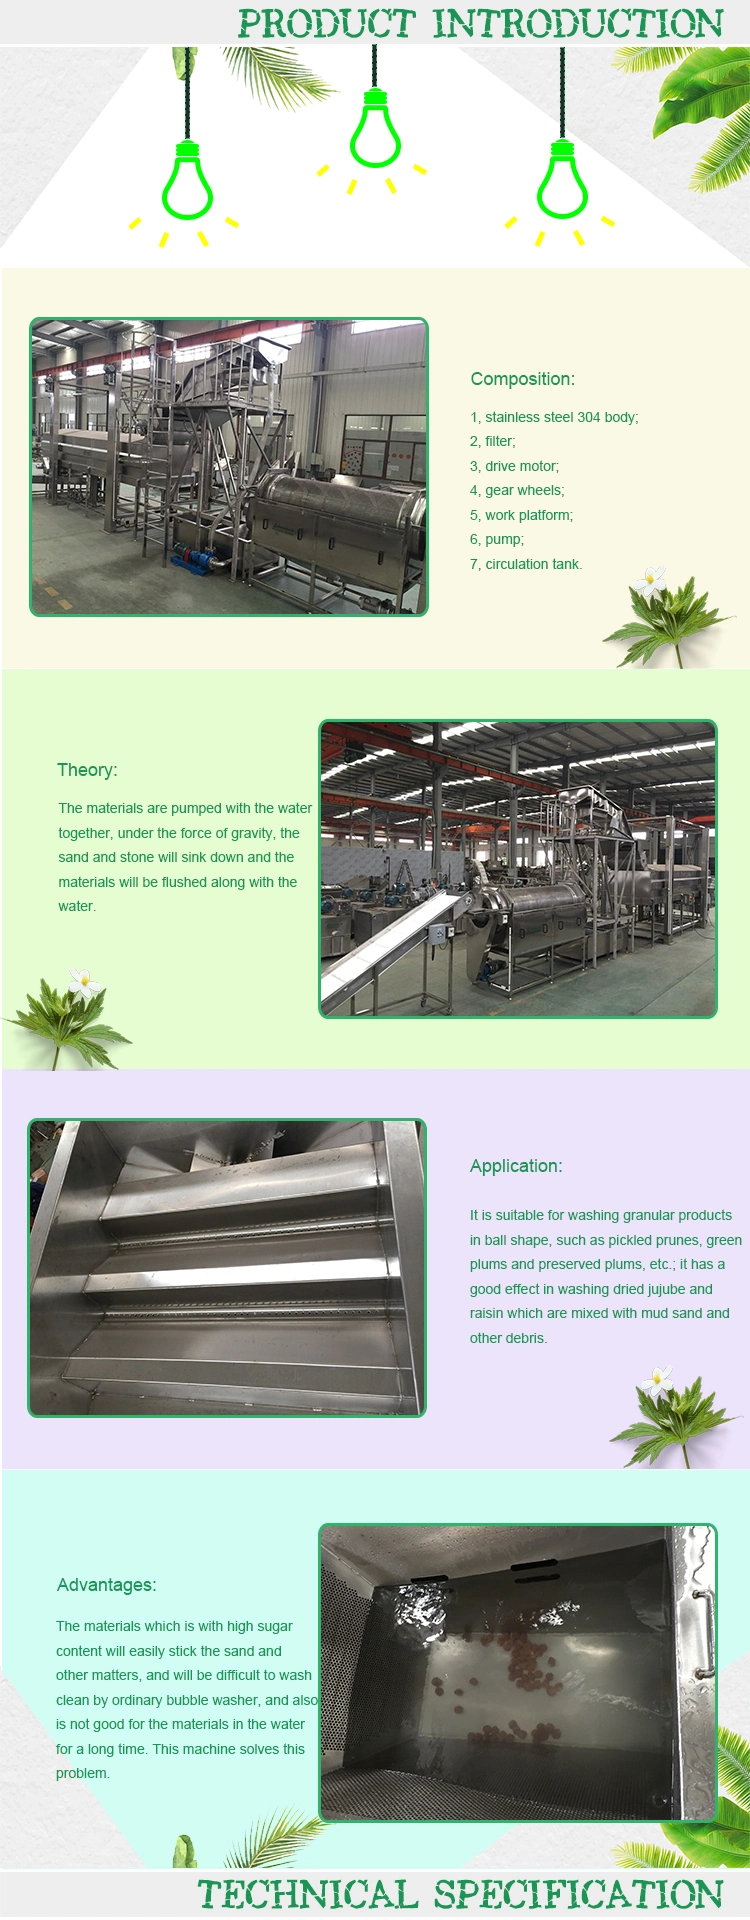 Walley Machinery Supplys Specific Waterfall Type of Washing Machine for Raisin Cleaning